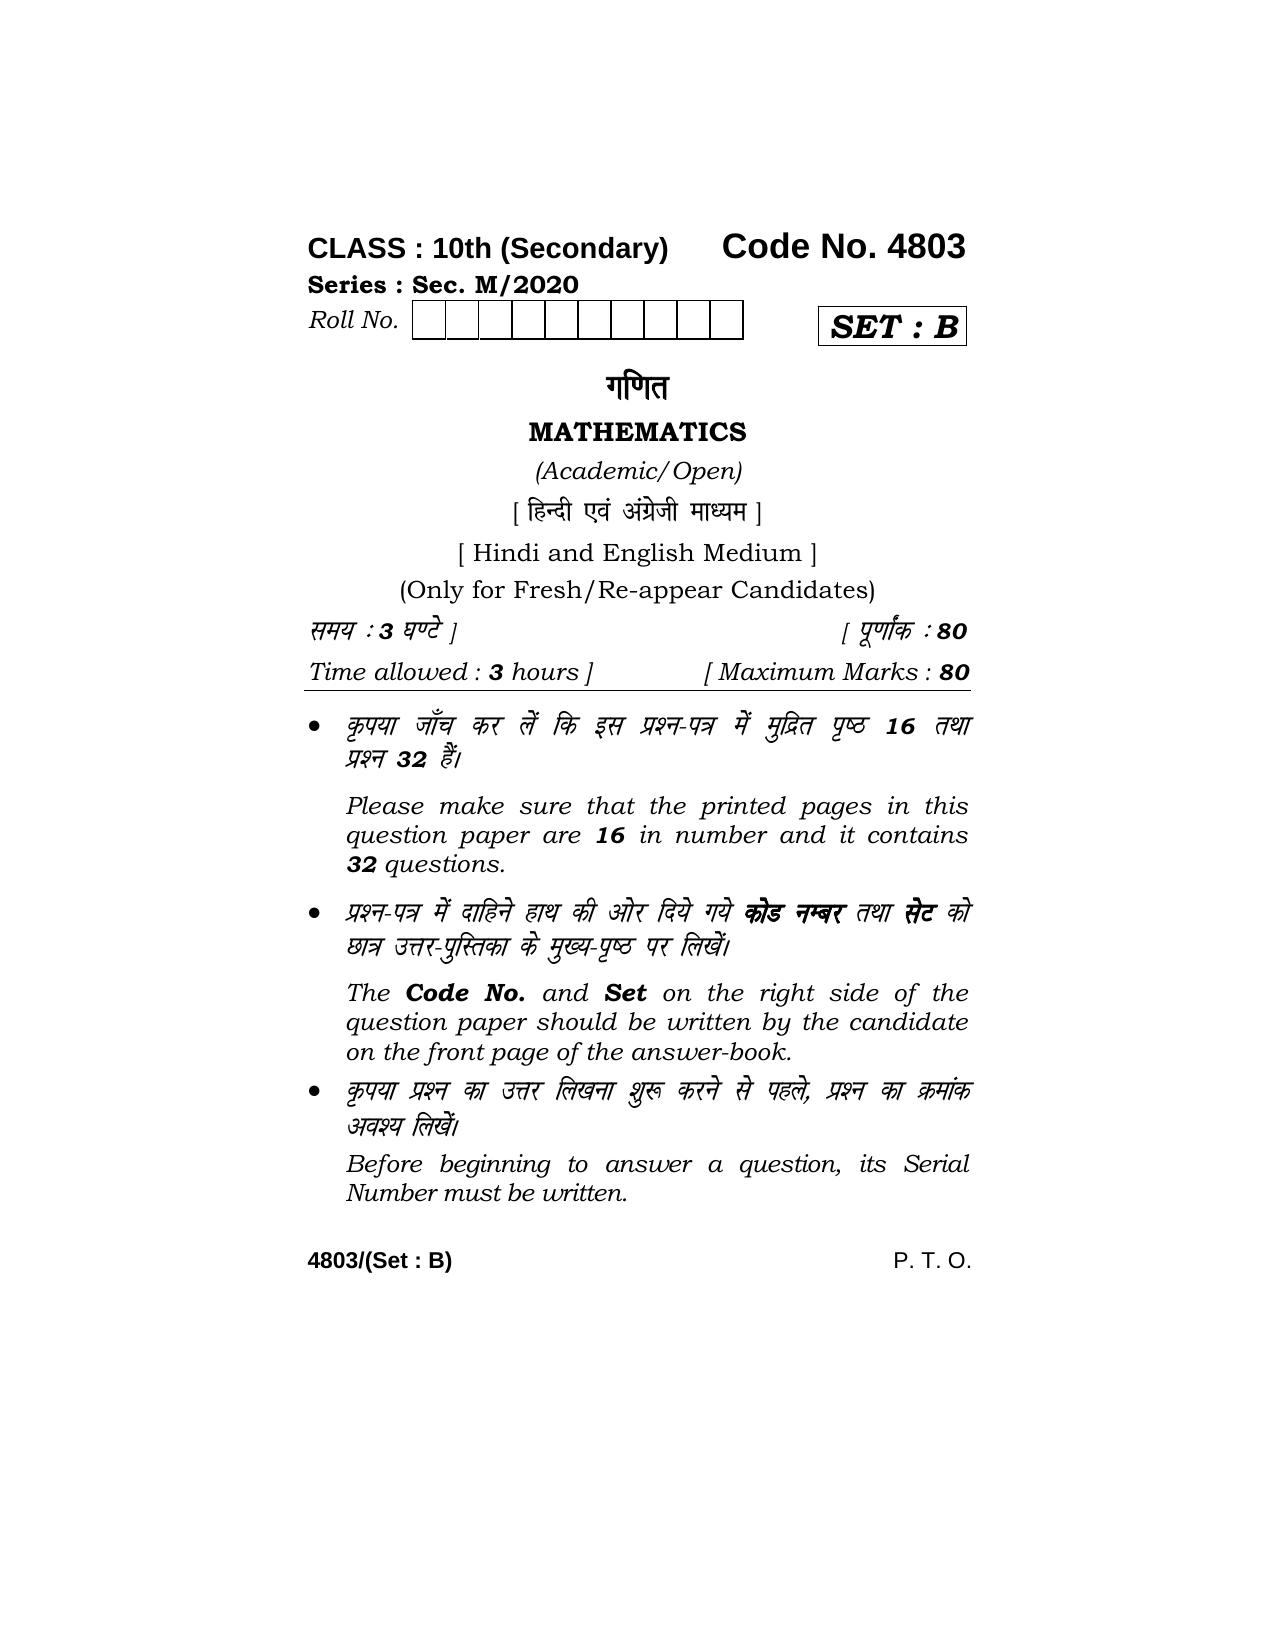 Haryana Board HBSE Class 10 Mathematics 2020 Question Paper - Page 17